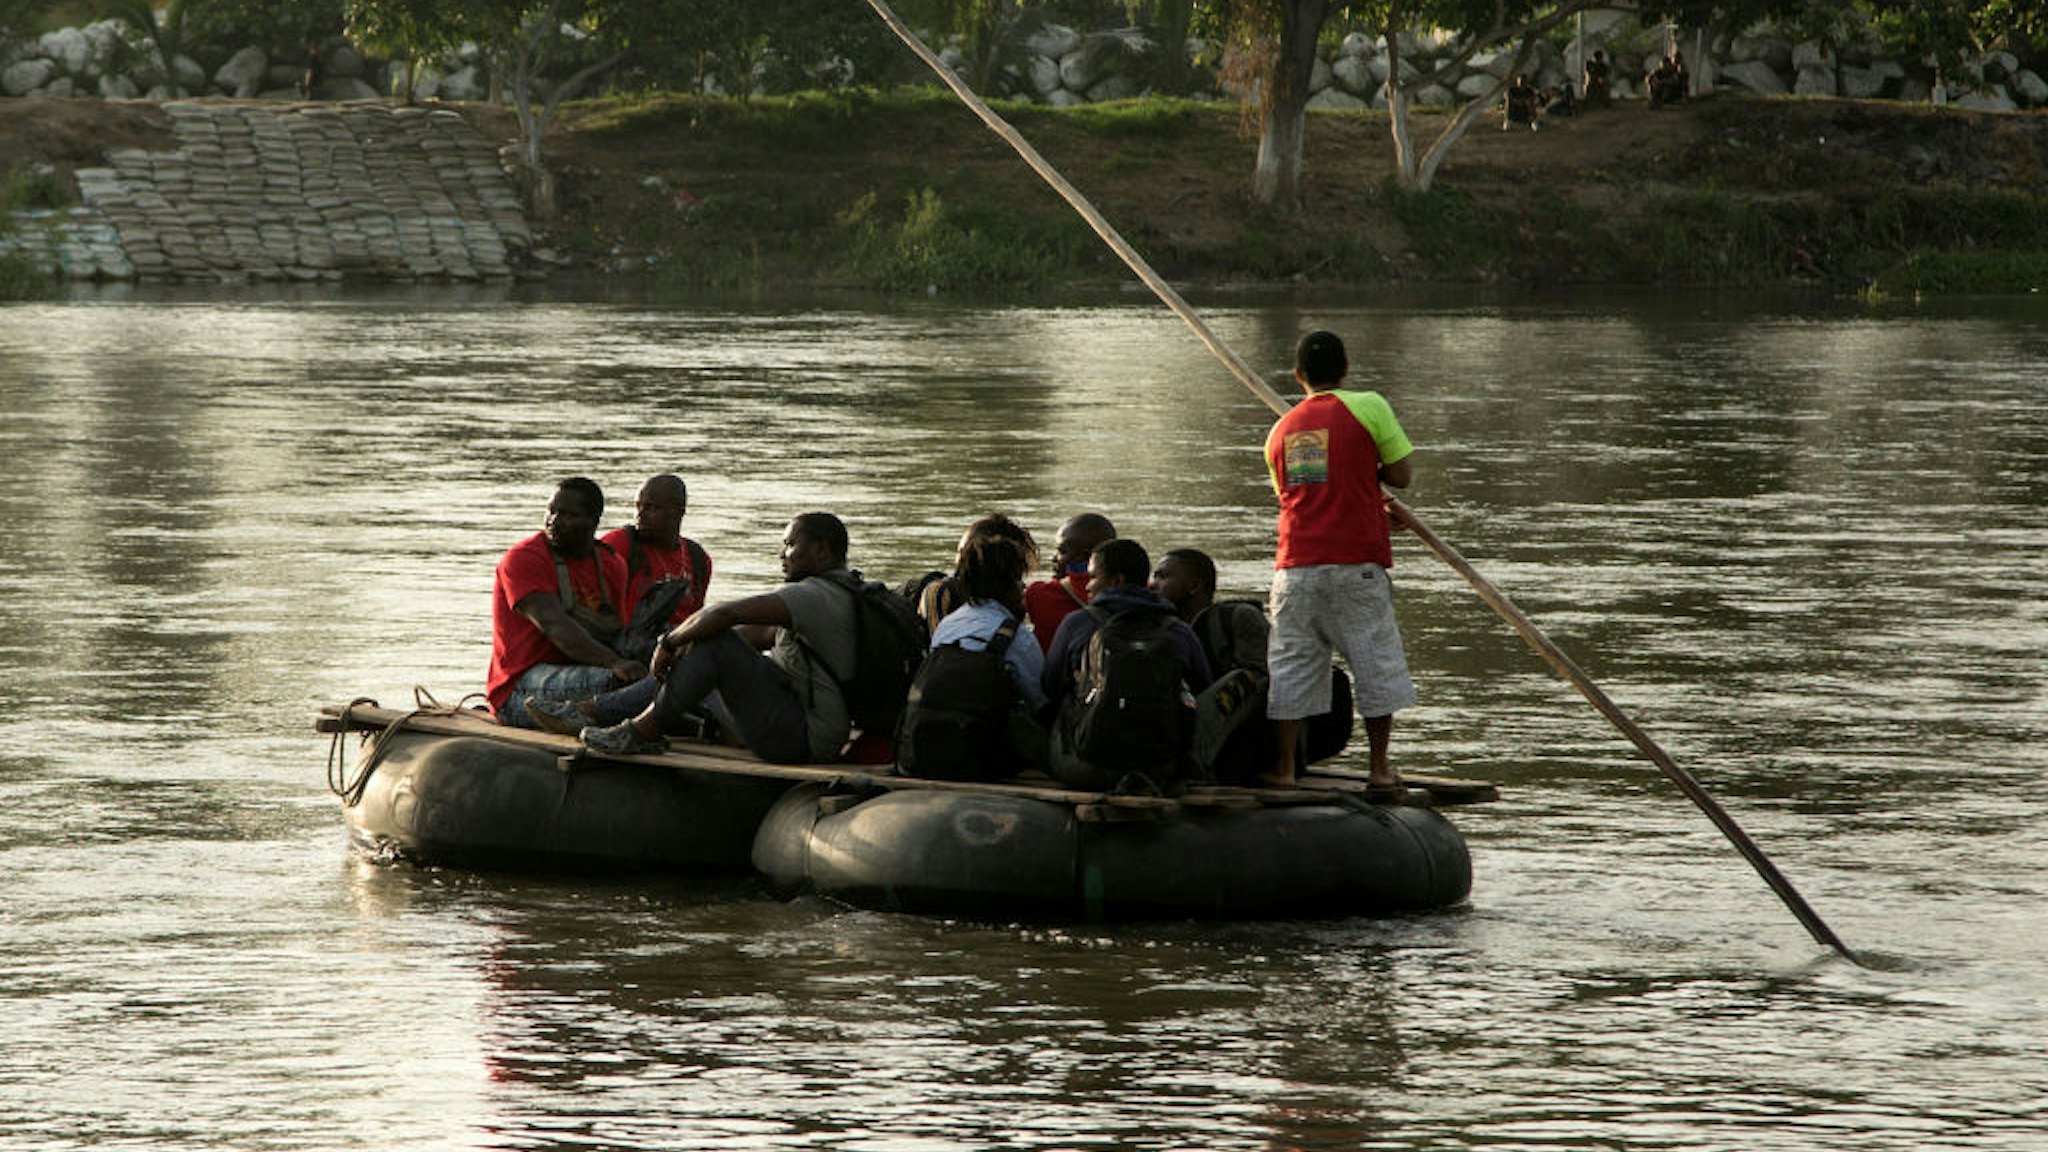 A group of migrants from Cameroon return to Guatemala on rafts on July 4, 2019 in Ciudad Hidalgo, Mexico.